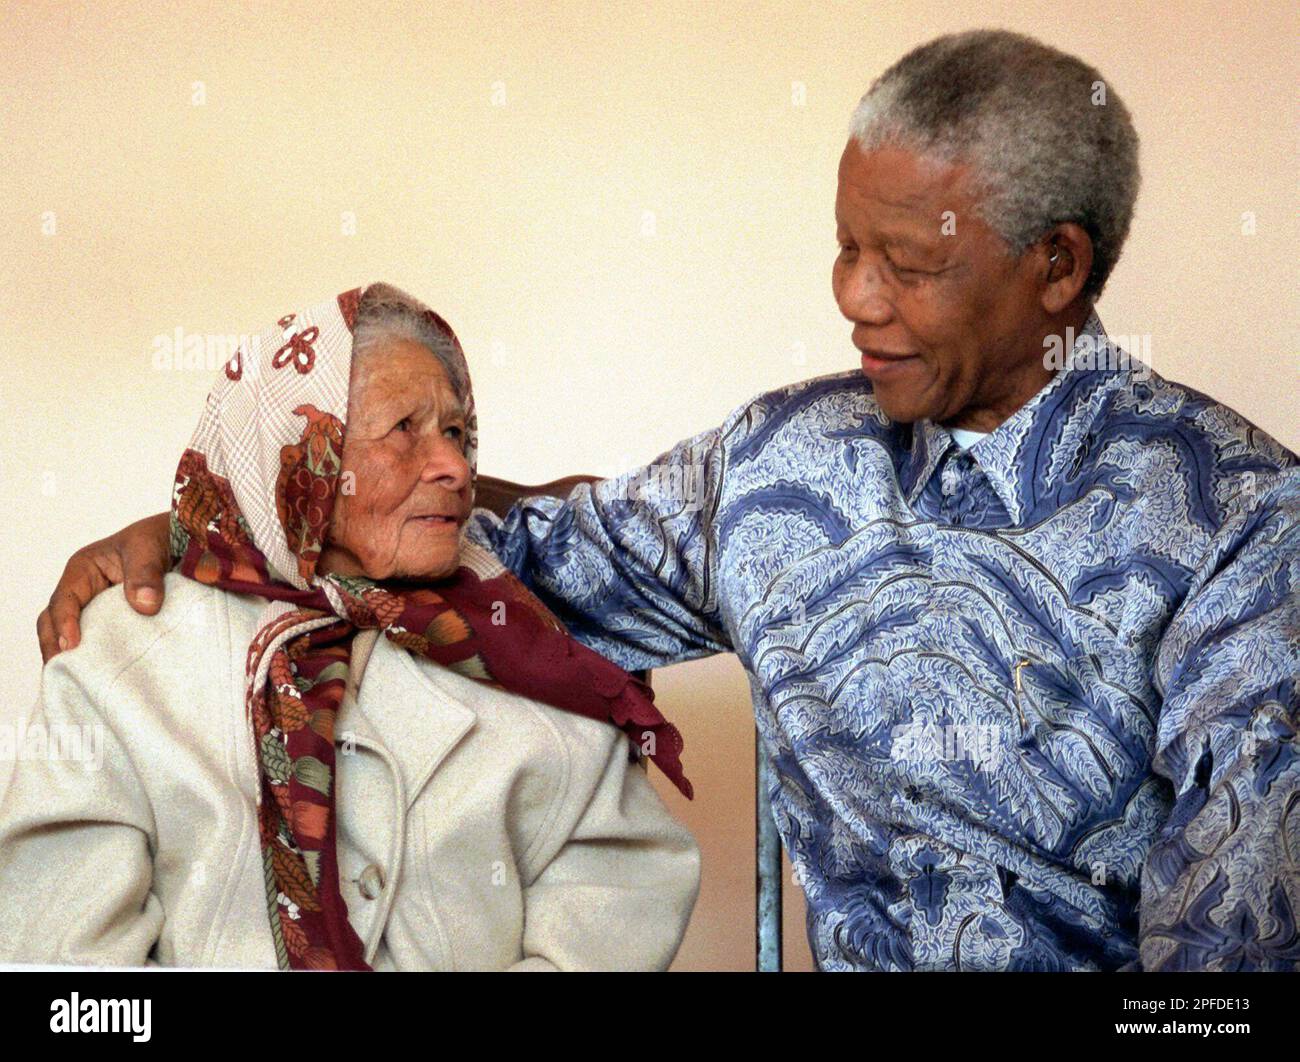 South African President Nelson Mandela, rights pays homage as he visits  96-year-old Augusta Lollan, left, at her home in Soweto, Tuesday June 30,  1998. Forty years ago Mandela used to meet fellow